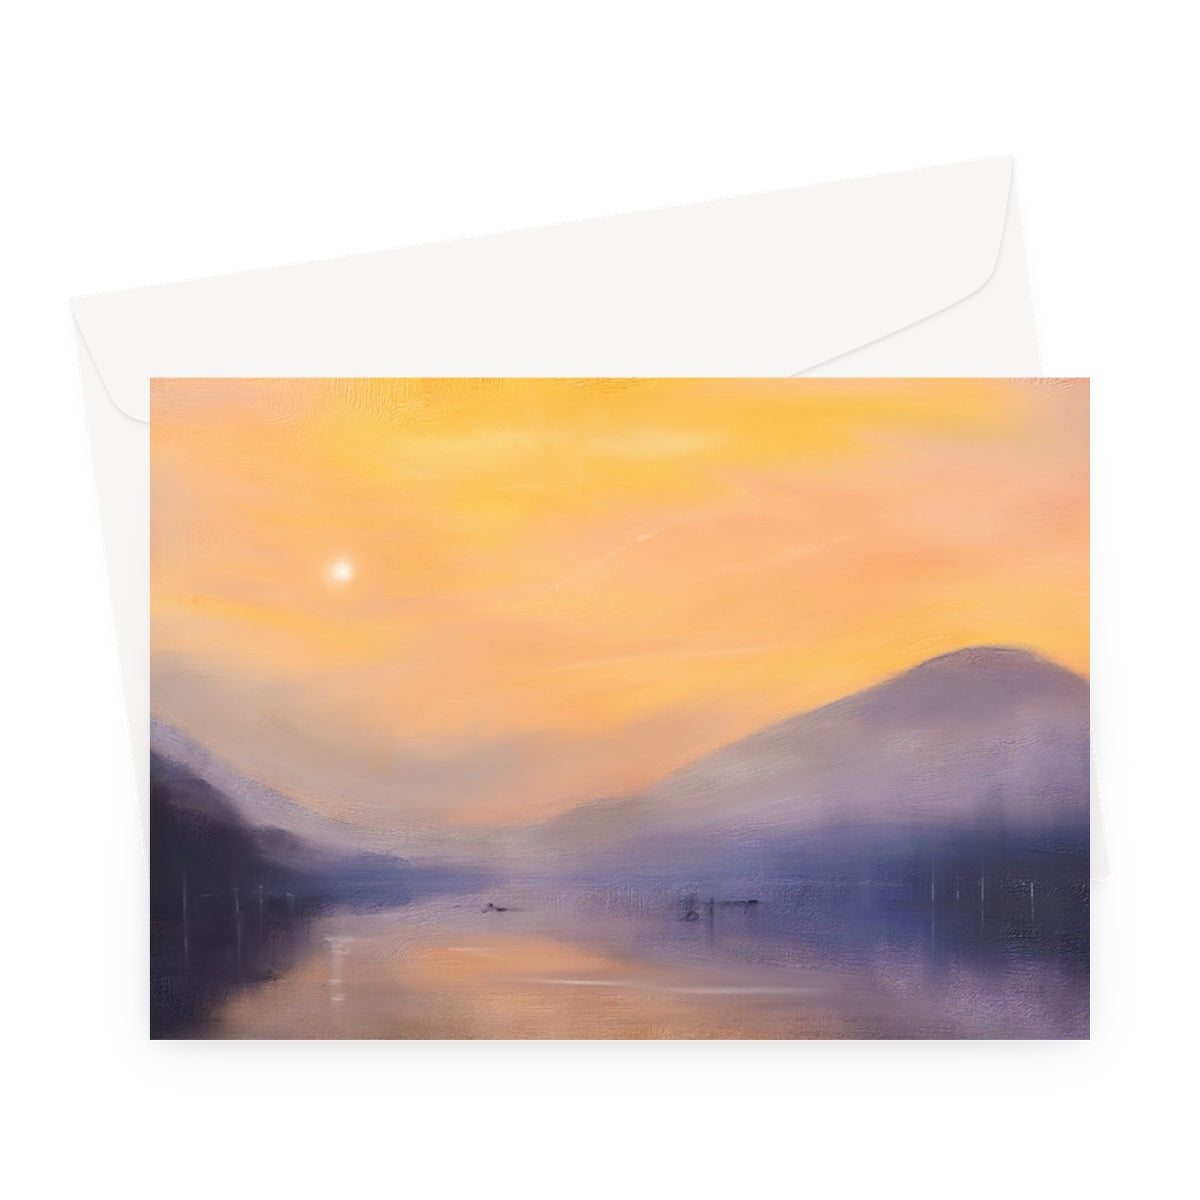 Loch Eck Dusk Art Gifts Greeting Card-Greetings Cards-Scottish Lochs & Mountains Art Gallery-A5 Landscape-1 Card-Paintings, Prints, Homeware, Art Gifts From Scotland By Scottish Artist Kevin Hunter